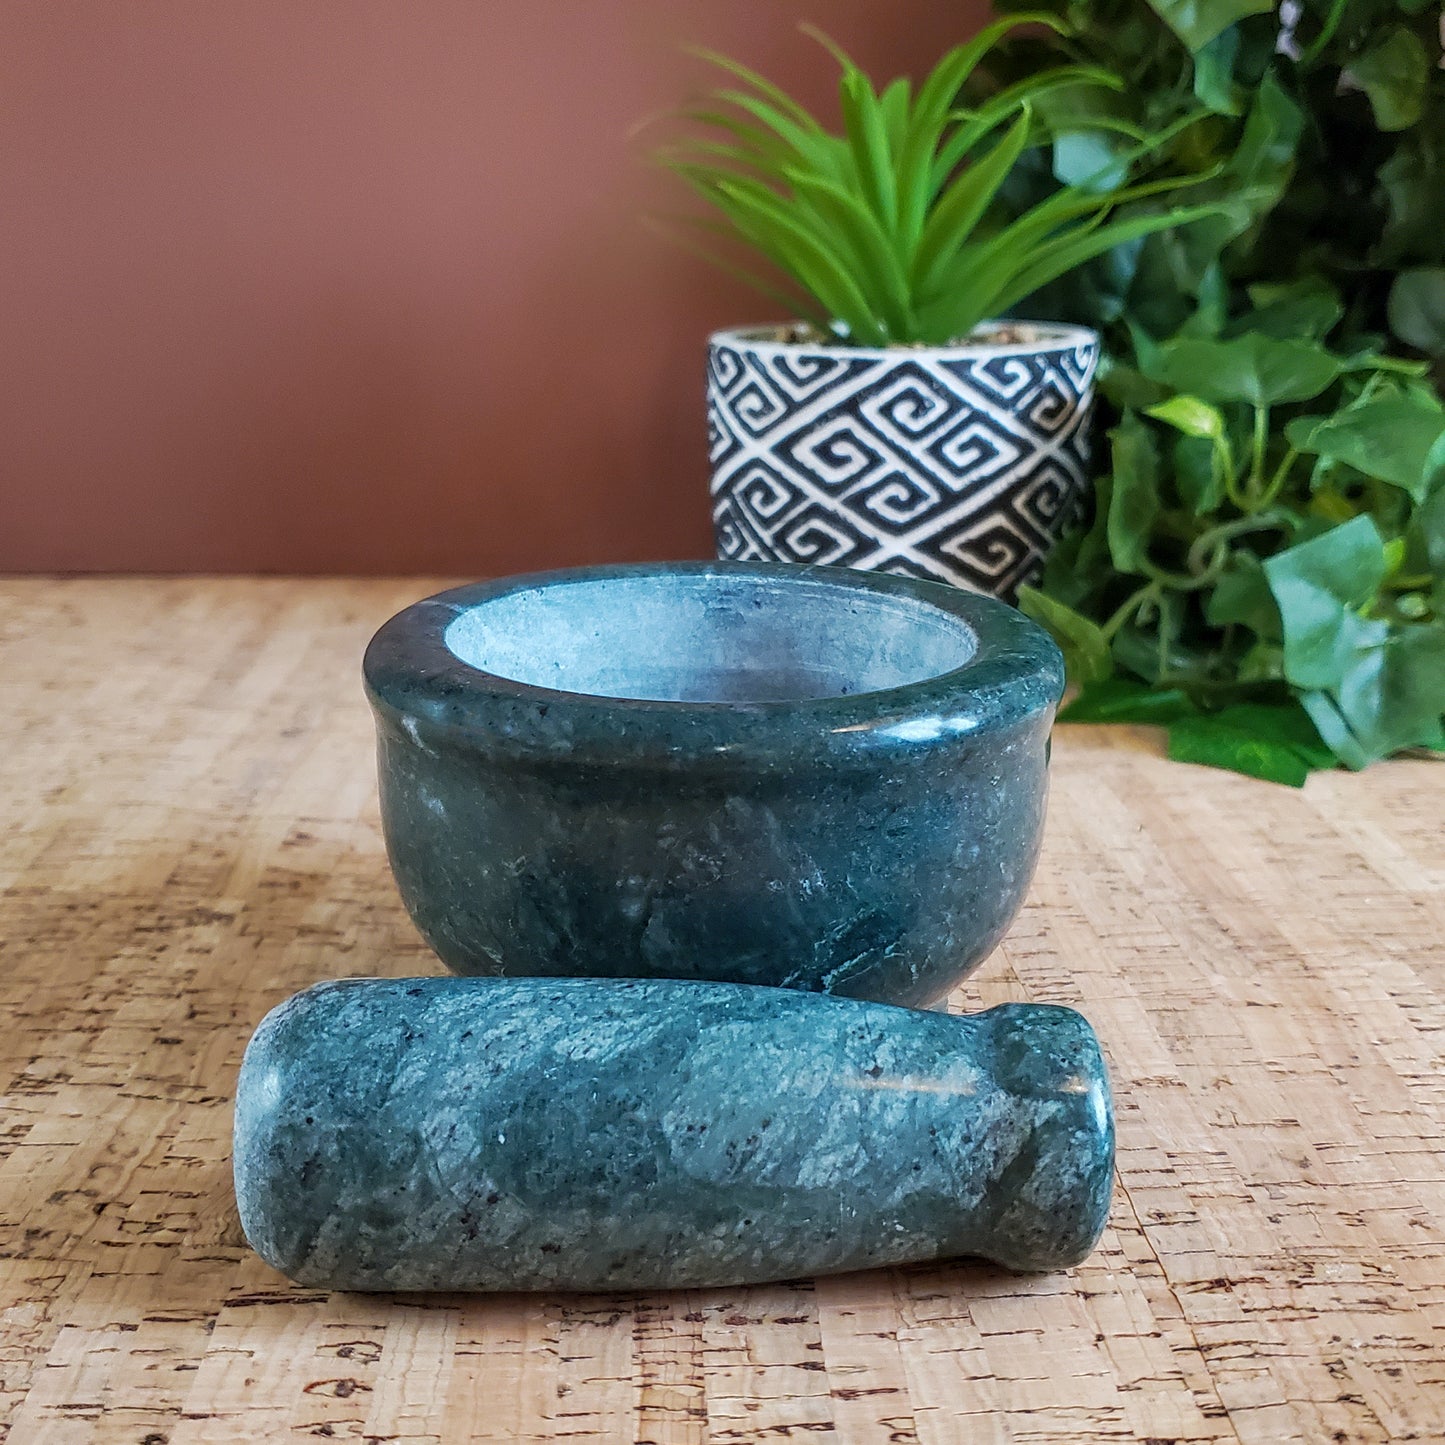 Green Marble Mortar and Pestle - Medium Size - Handmade All Natural Stone 4"